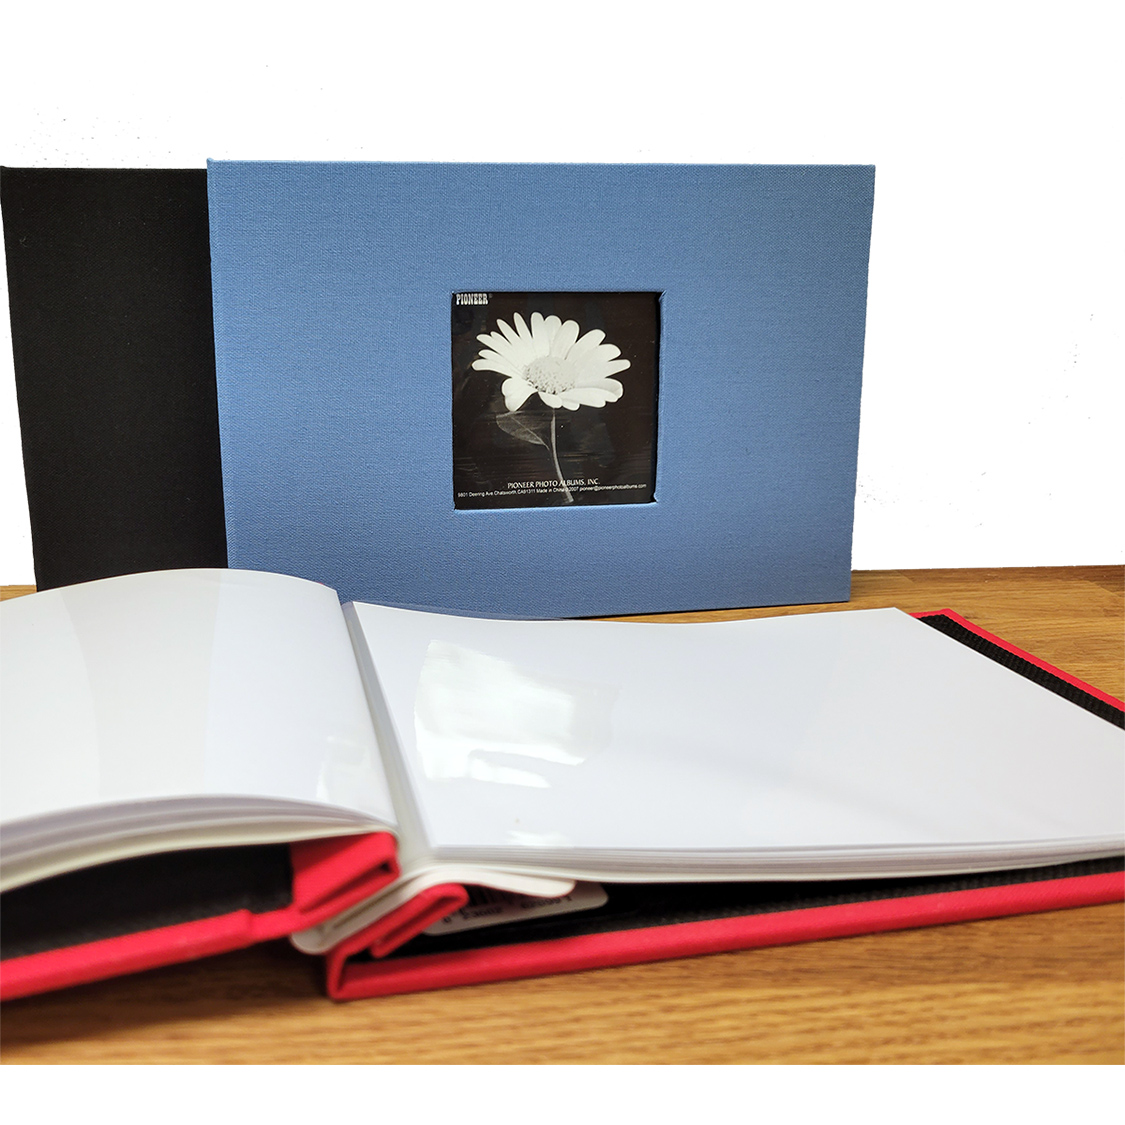 Pioneer Photo Albums Post-Bound Black Pocket Album for 5x7 and